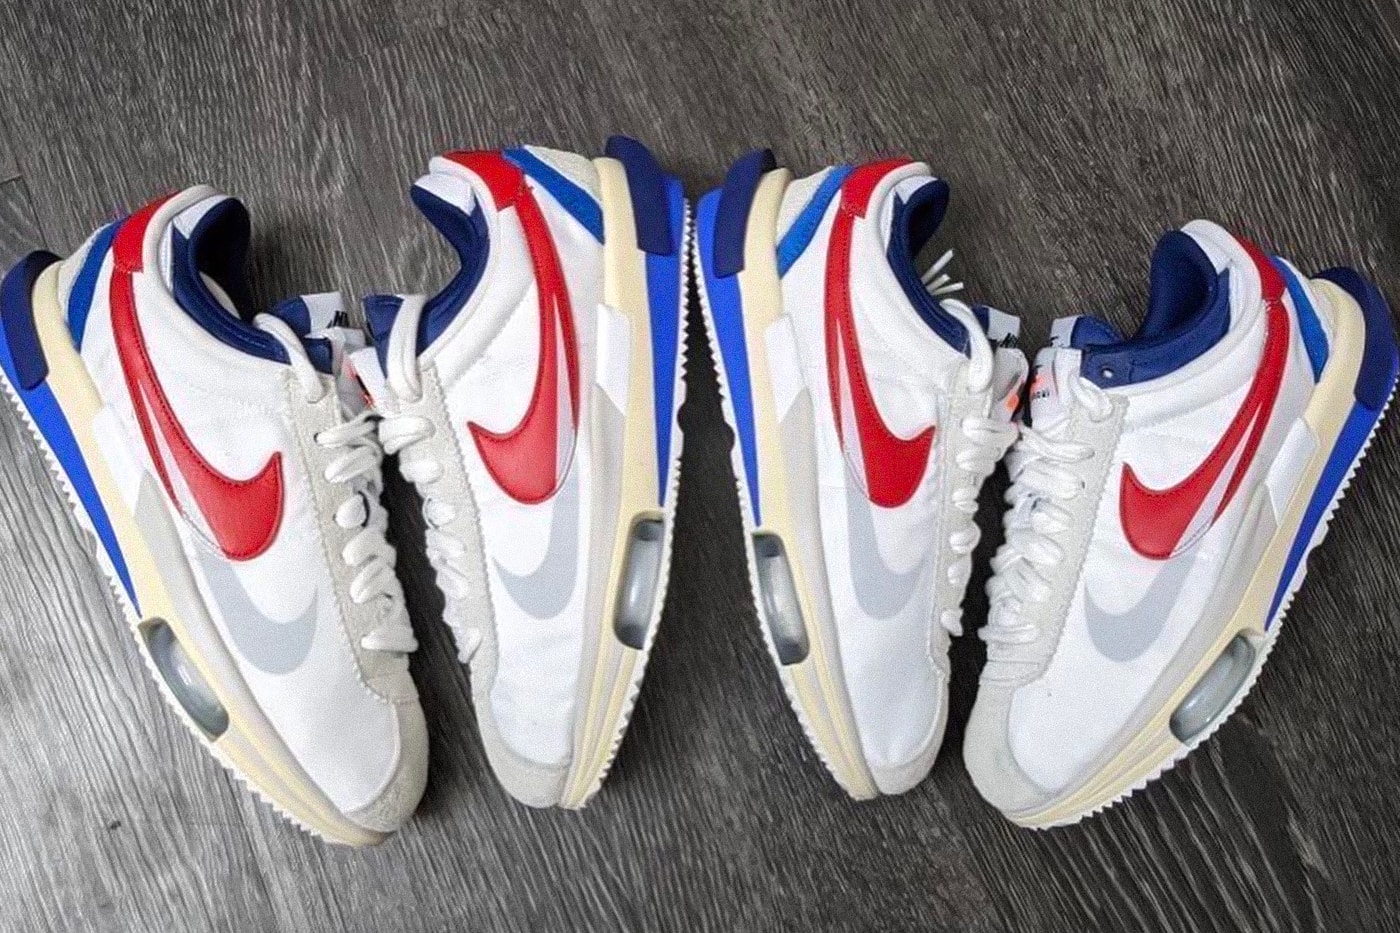 Sacai nike cortez 1972 Summer Olympics colorway 50th anniversary chitose abe red blue zoom air release info date price 